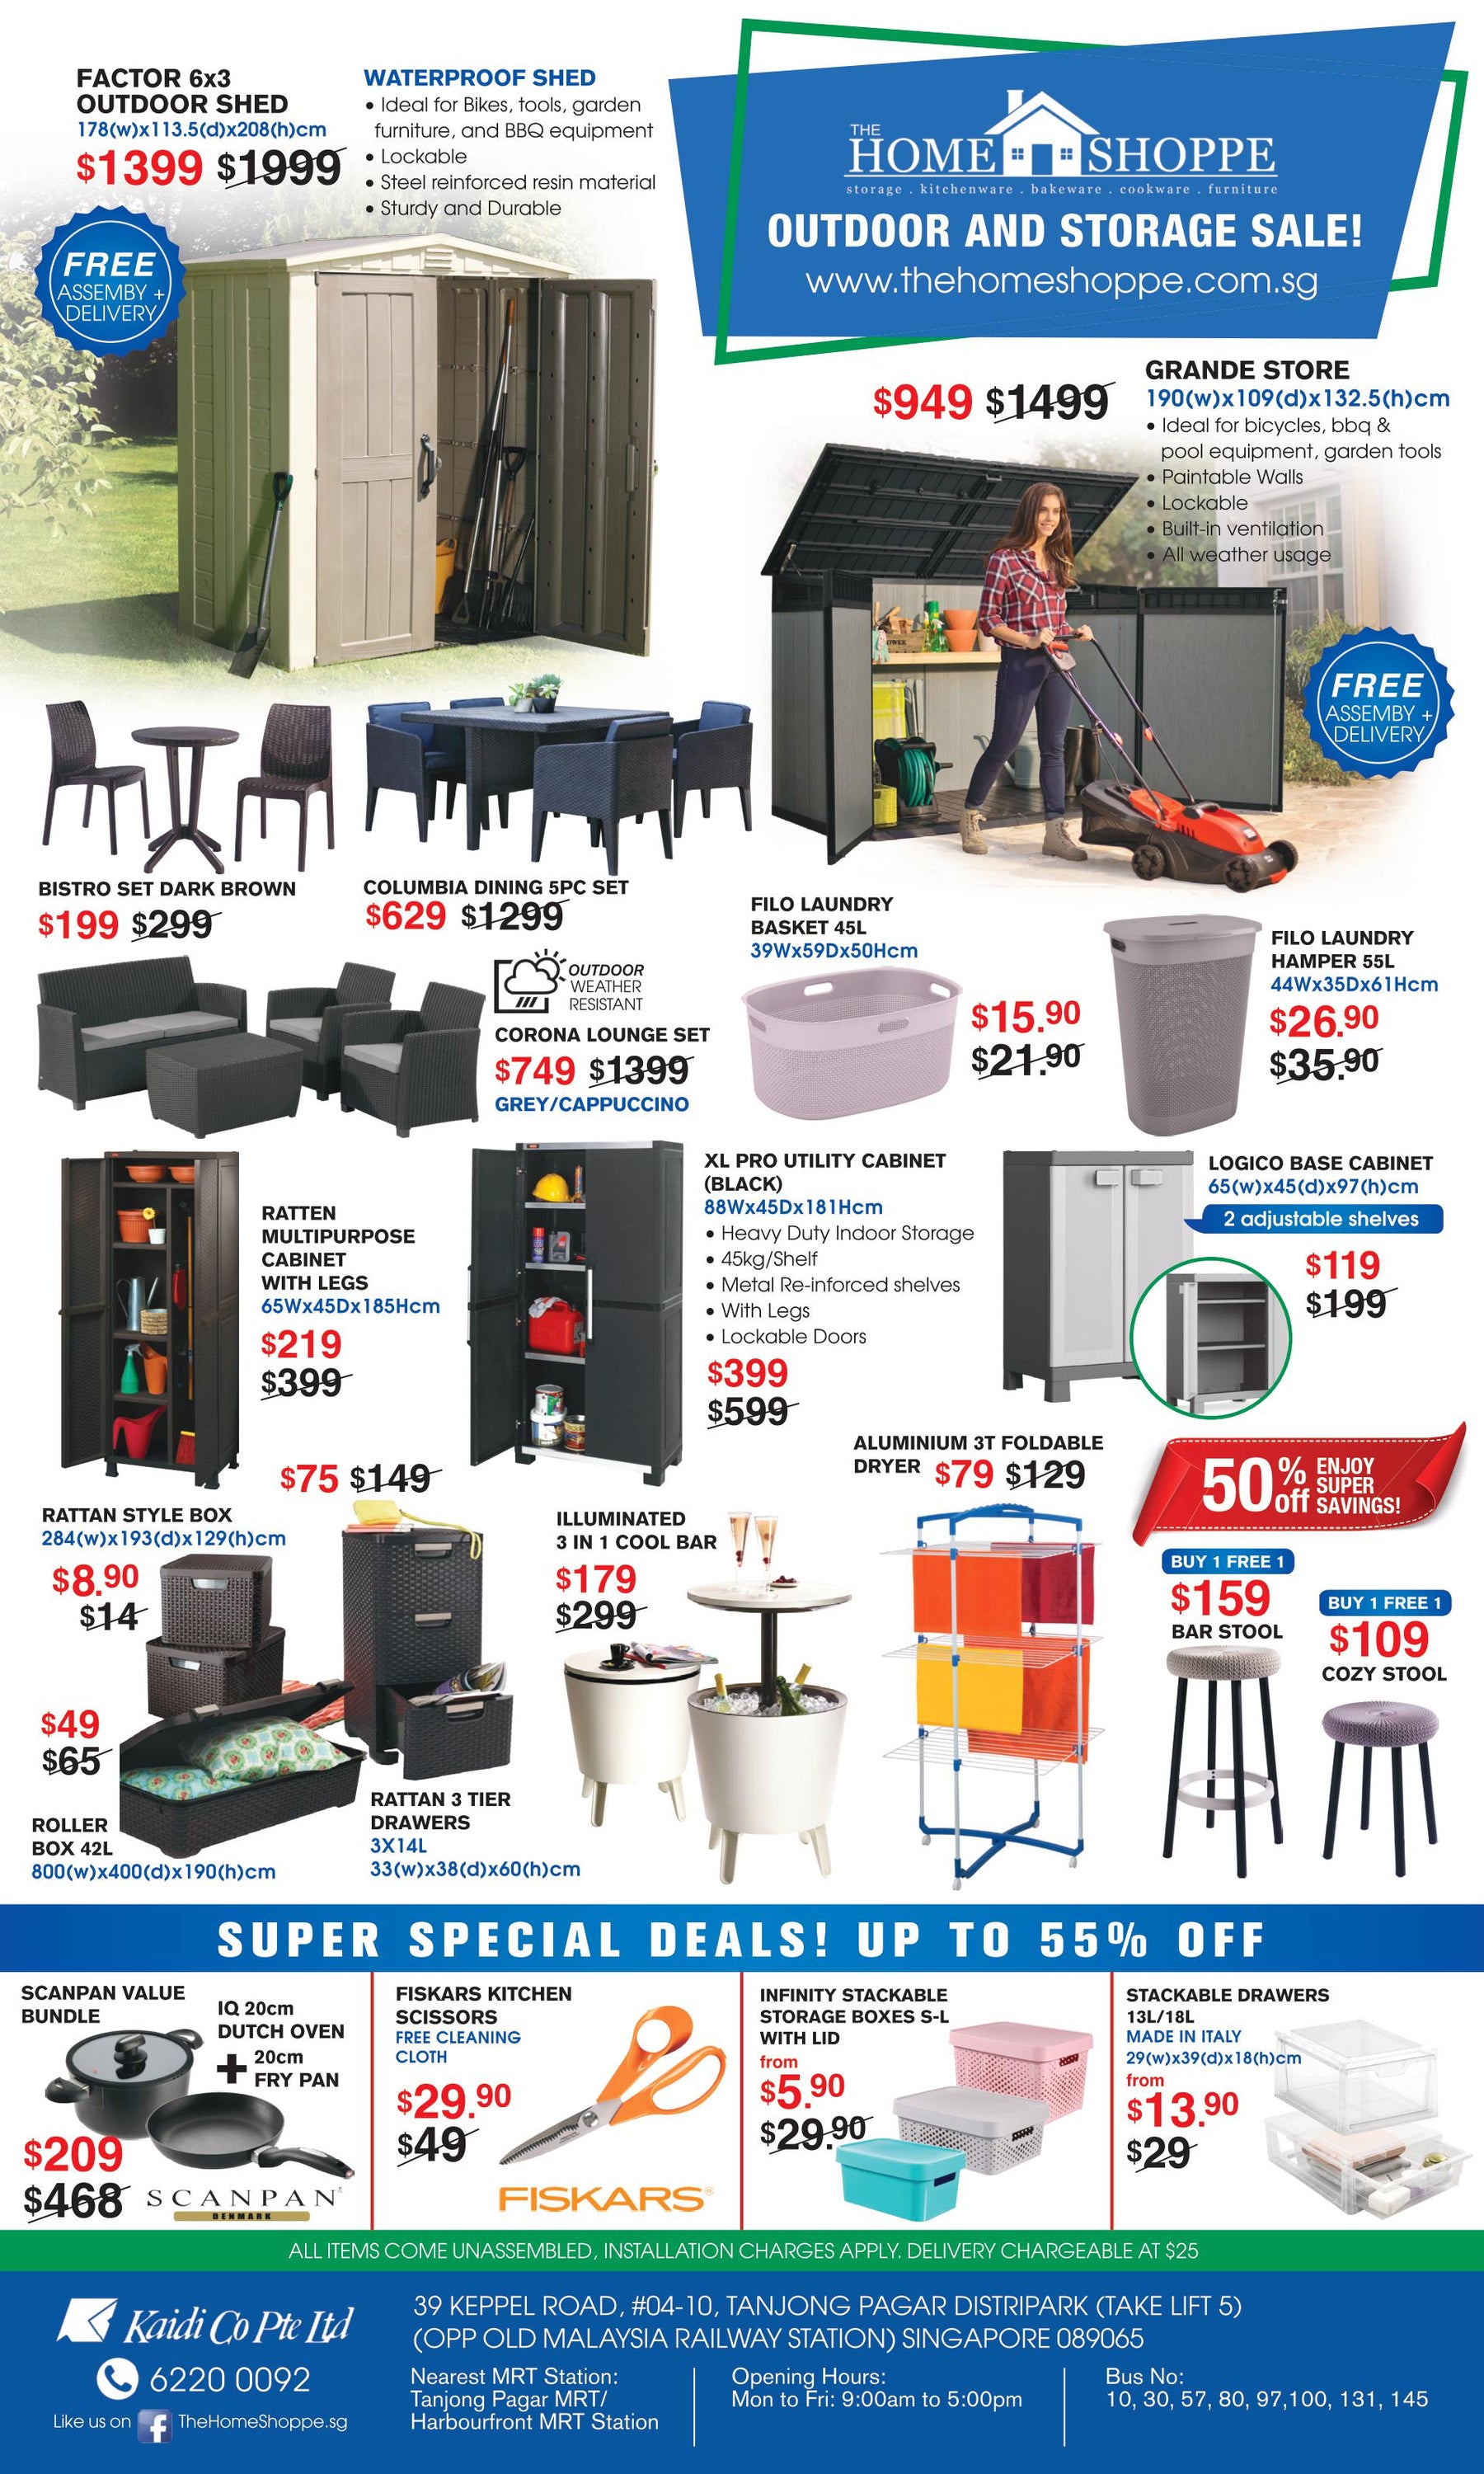 Outdoor and Storage Sale! Till 8th April 2018